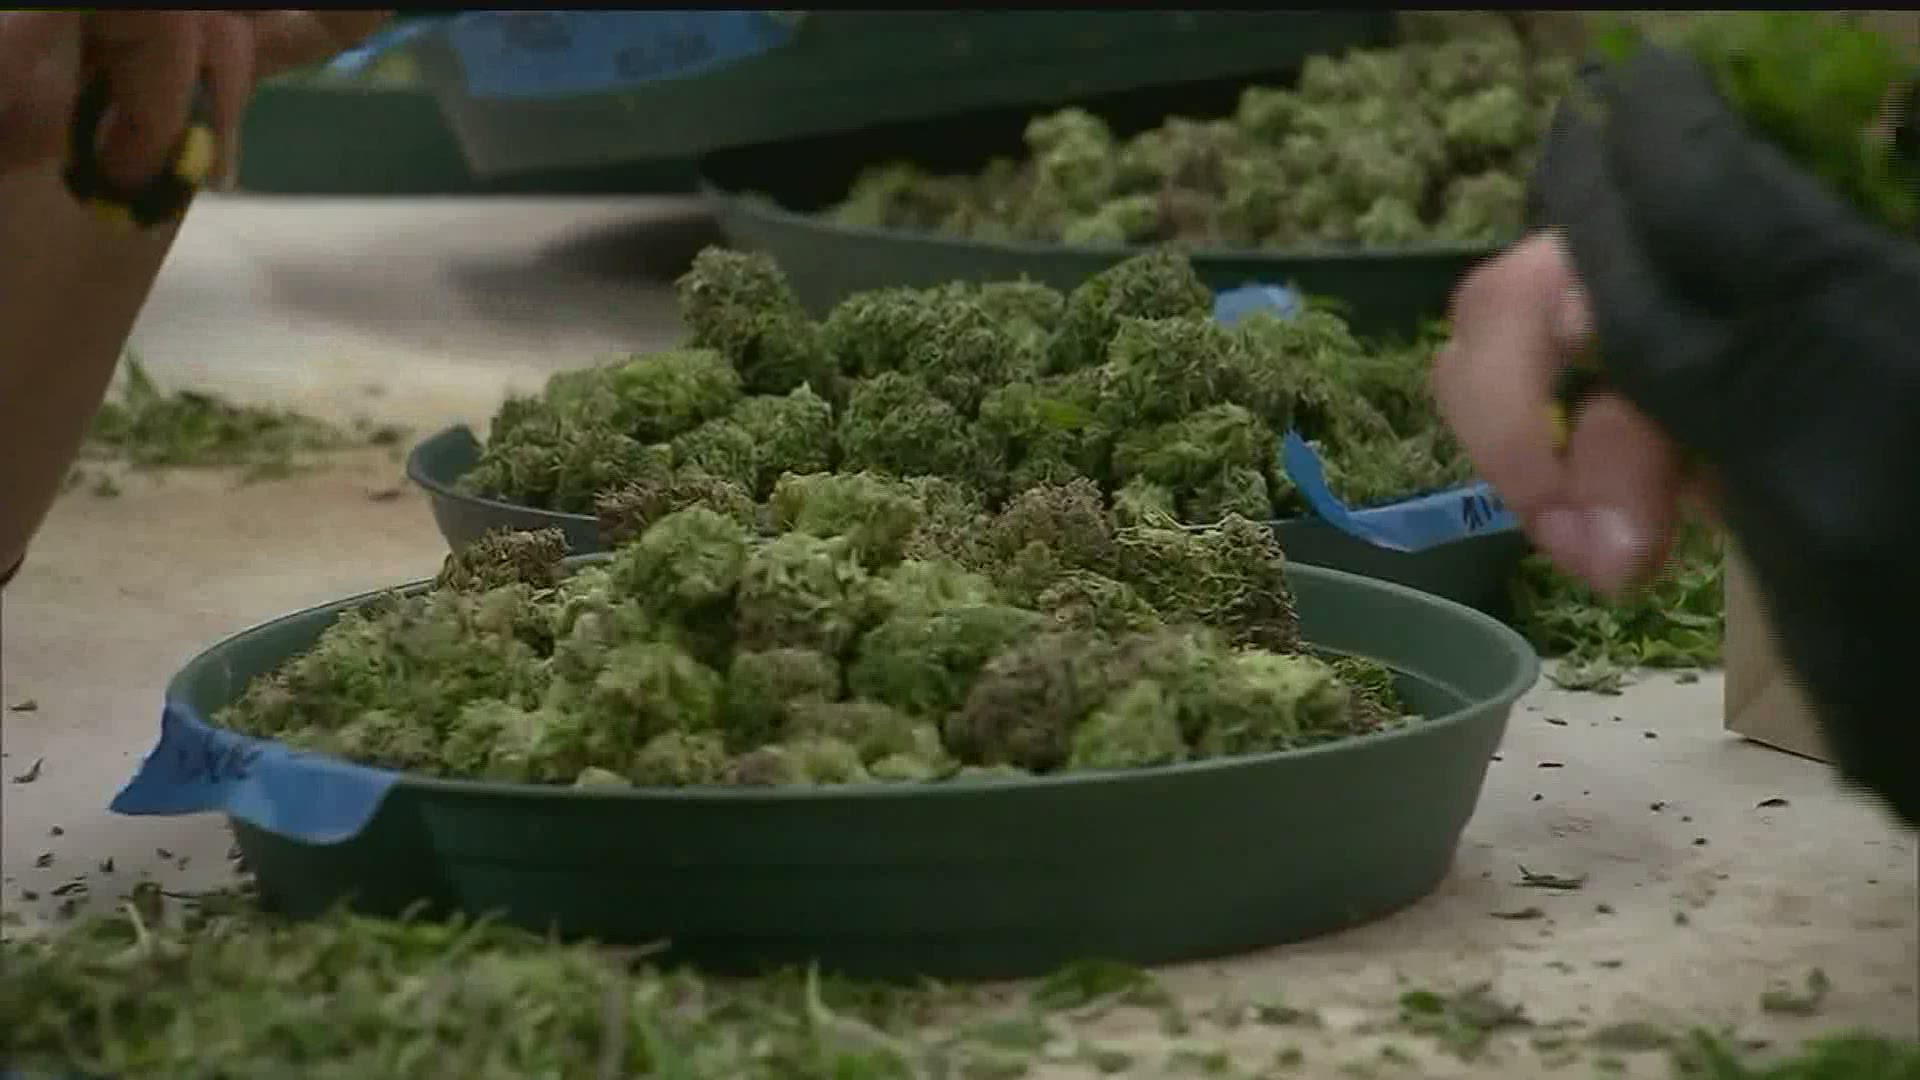 Proposed laws could make it easier for dispensaries to conduct business in Pennsylvania.